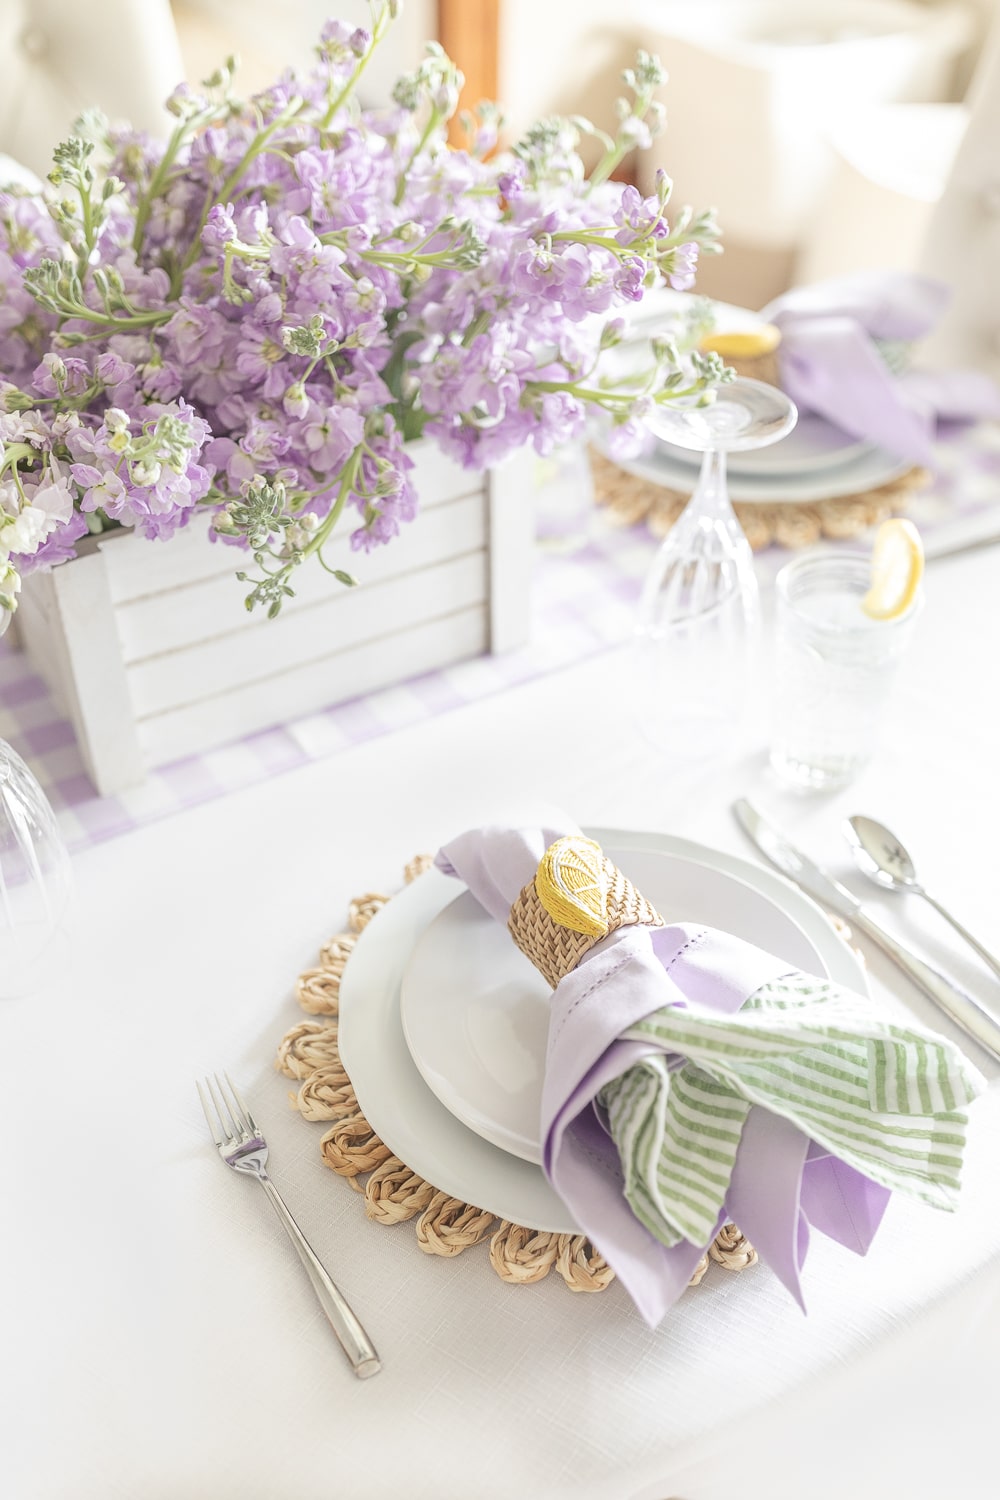 Blogger Stephanie Ziajka shares Mother's Day table ideas on Diary of a Debutante